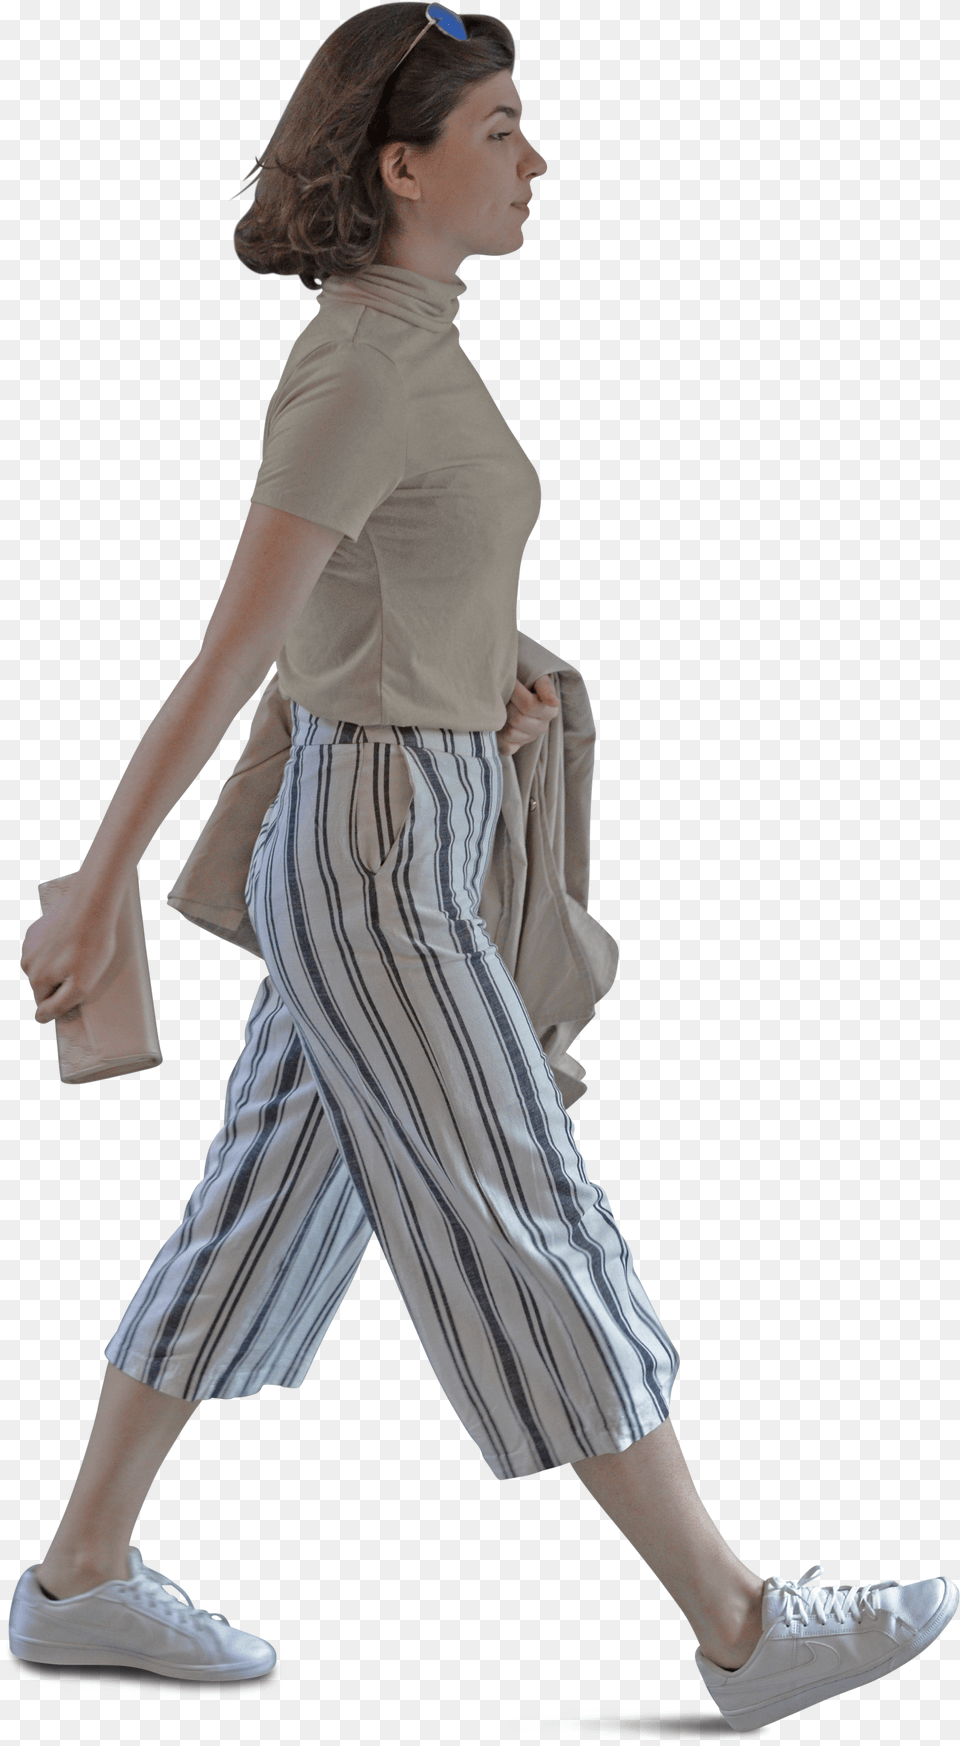 Shopping People In 2020 Striped Fashion Pinstripe Free Transparent Png